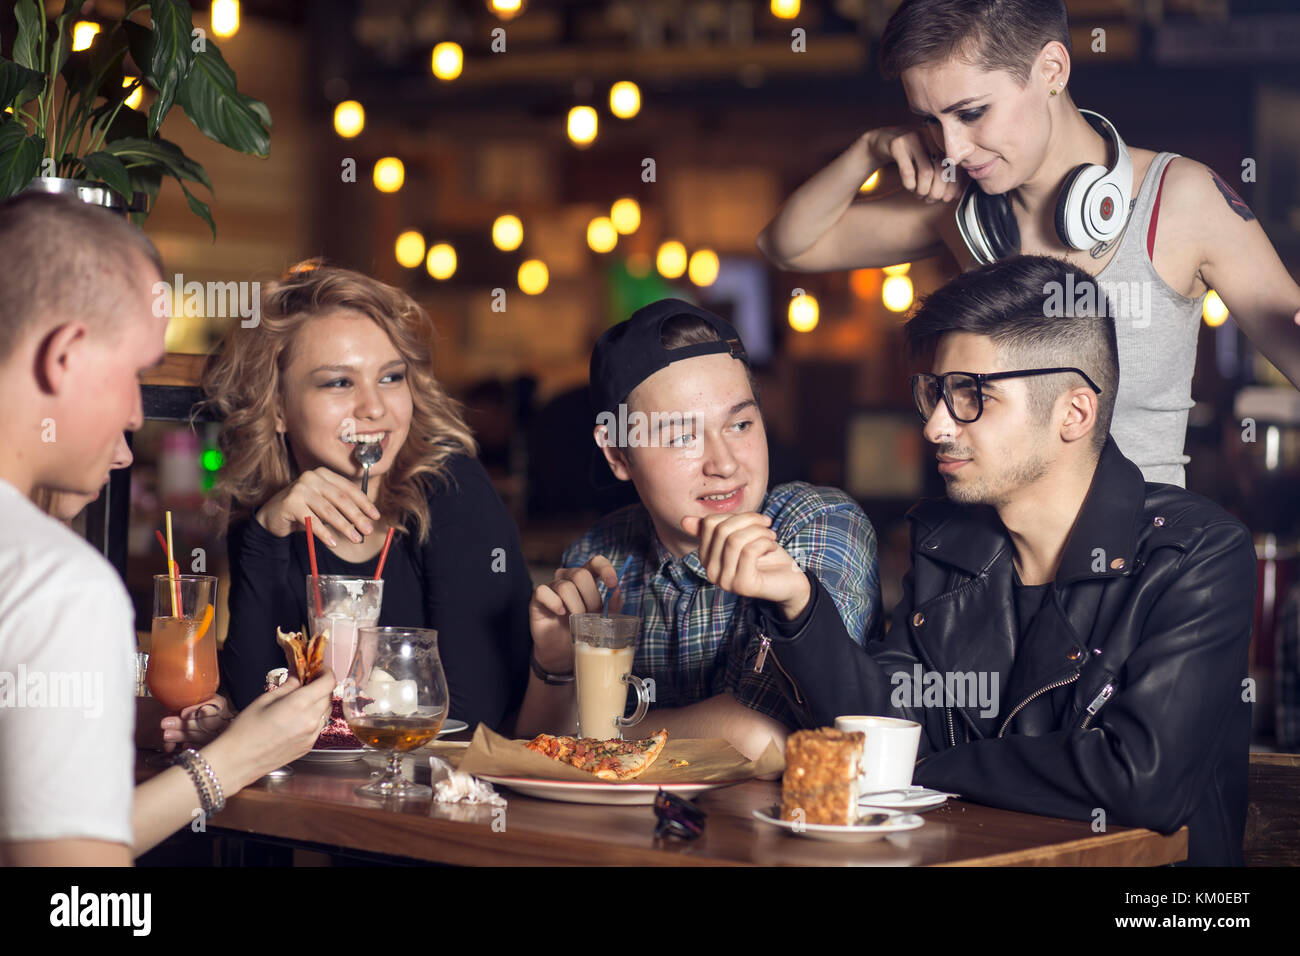 Group Of People Drinking Coffee in cafe Concept Stock Photo